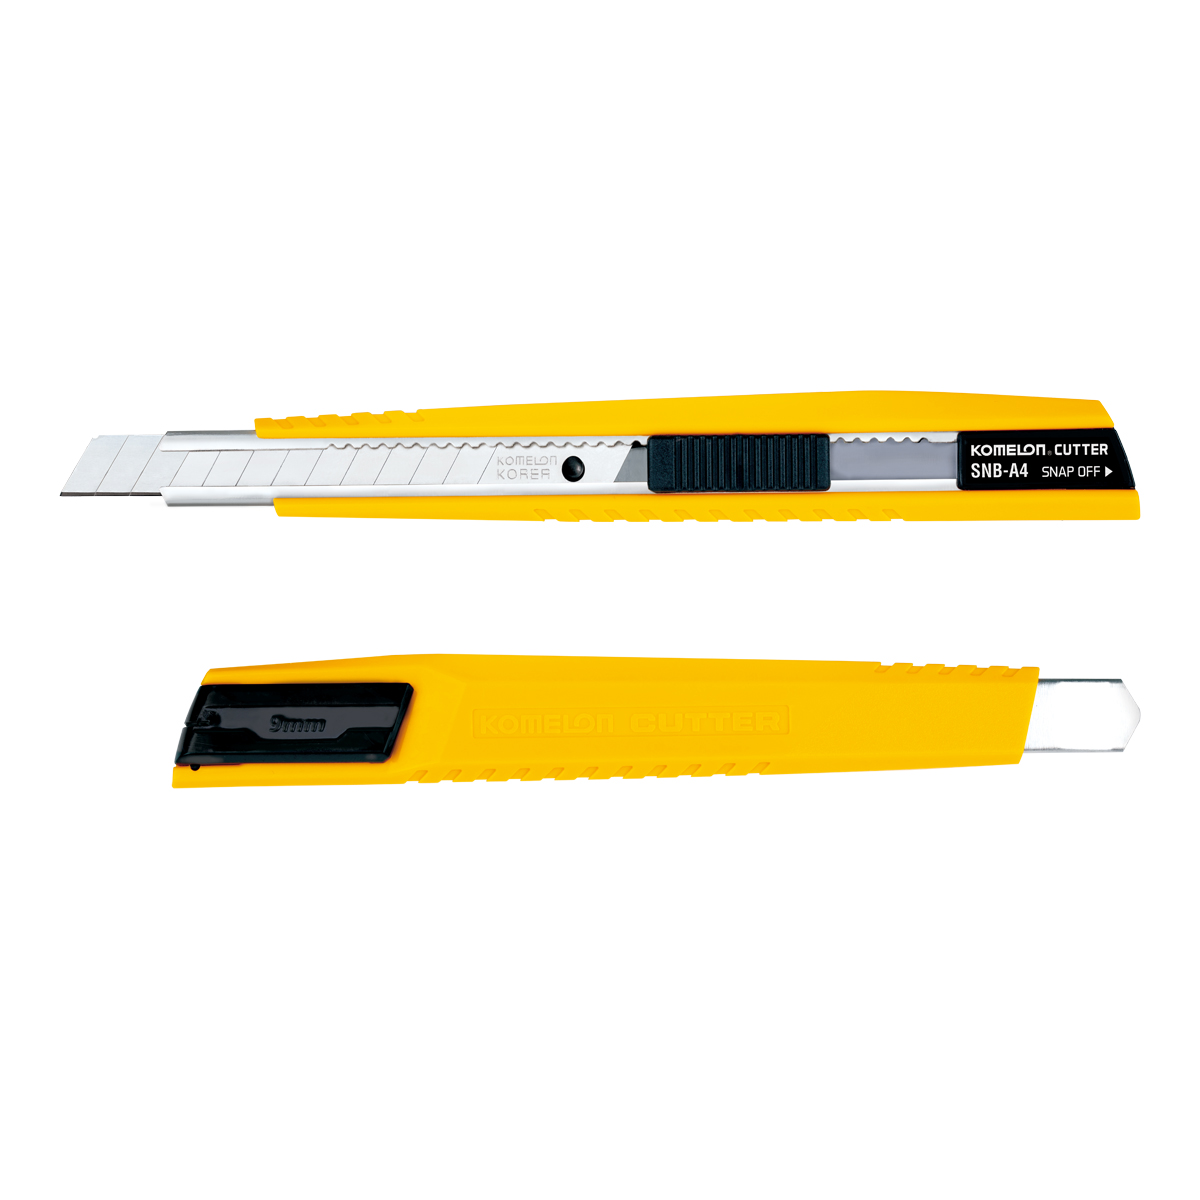 CUTTER KNIFE - SNB-A4 image1